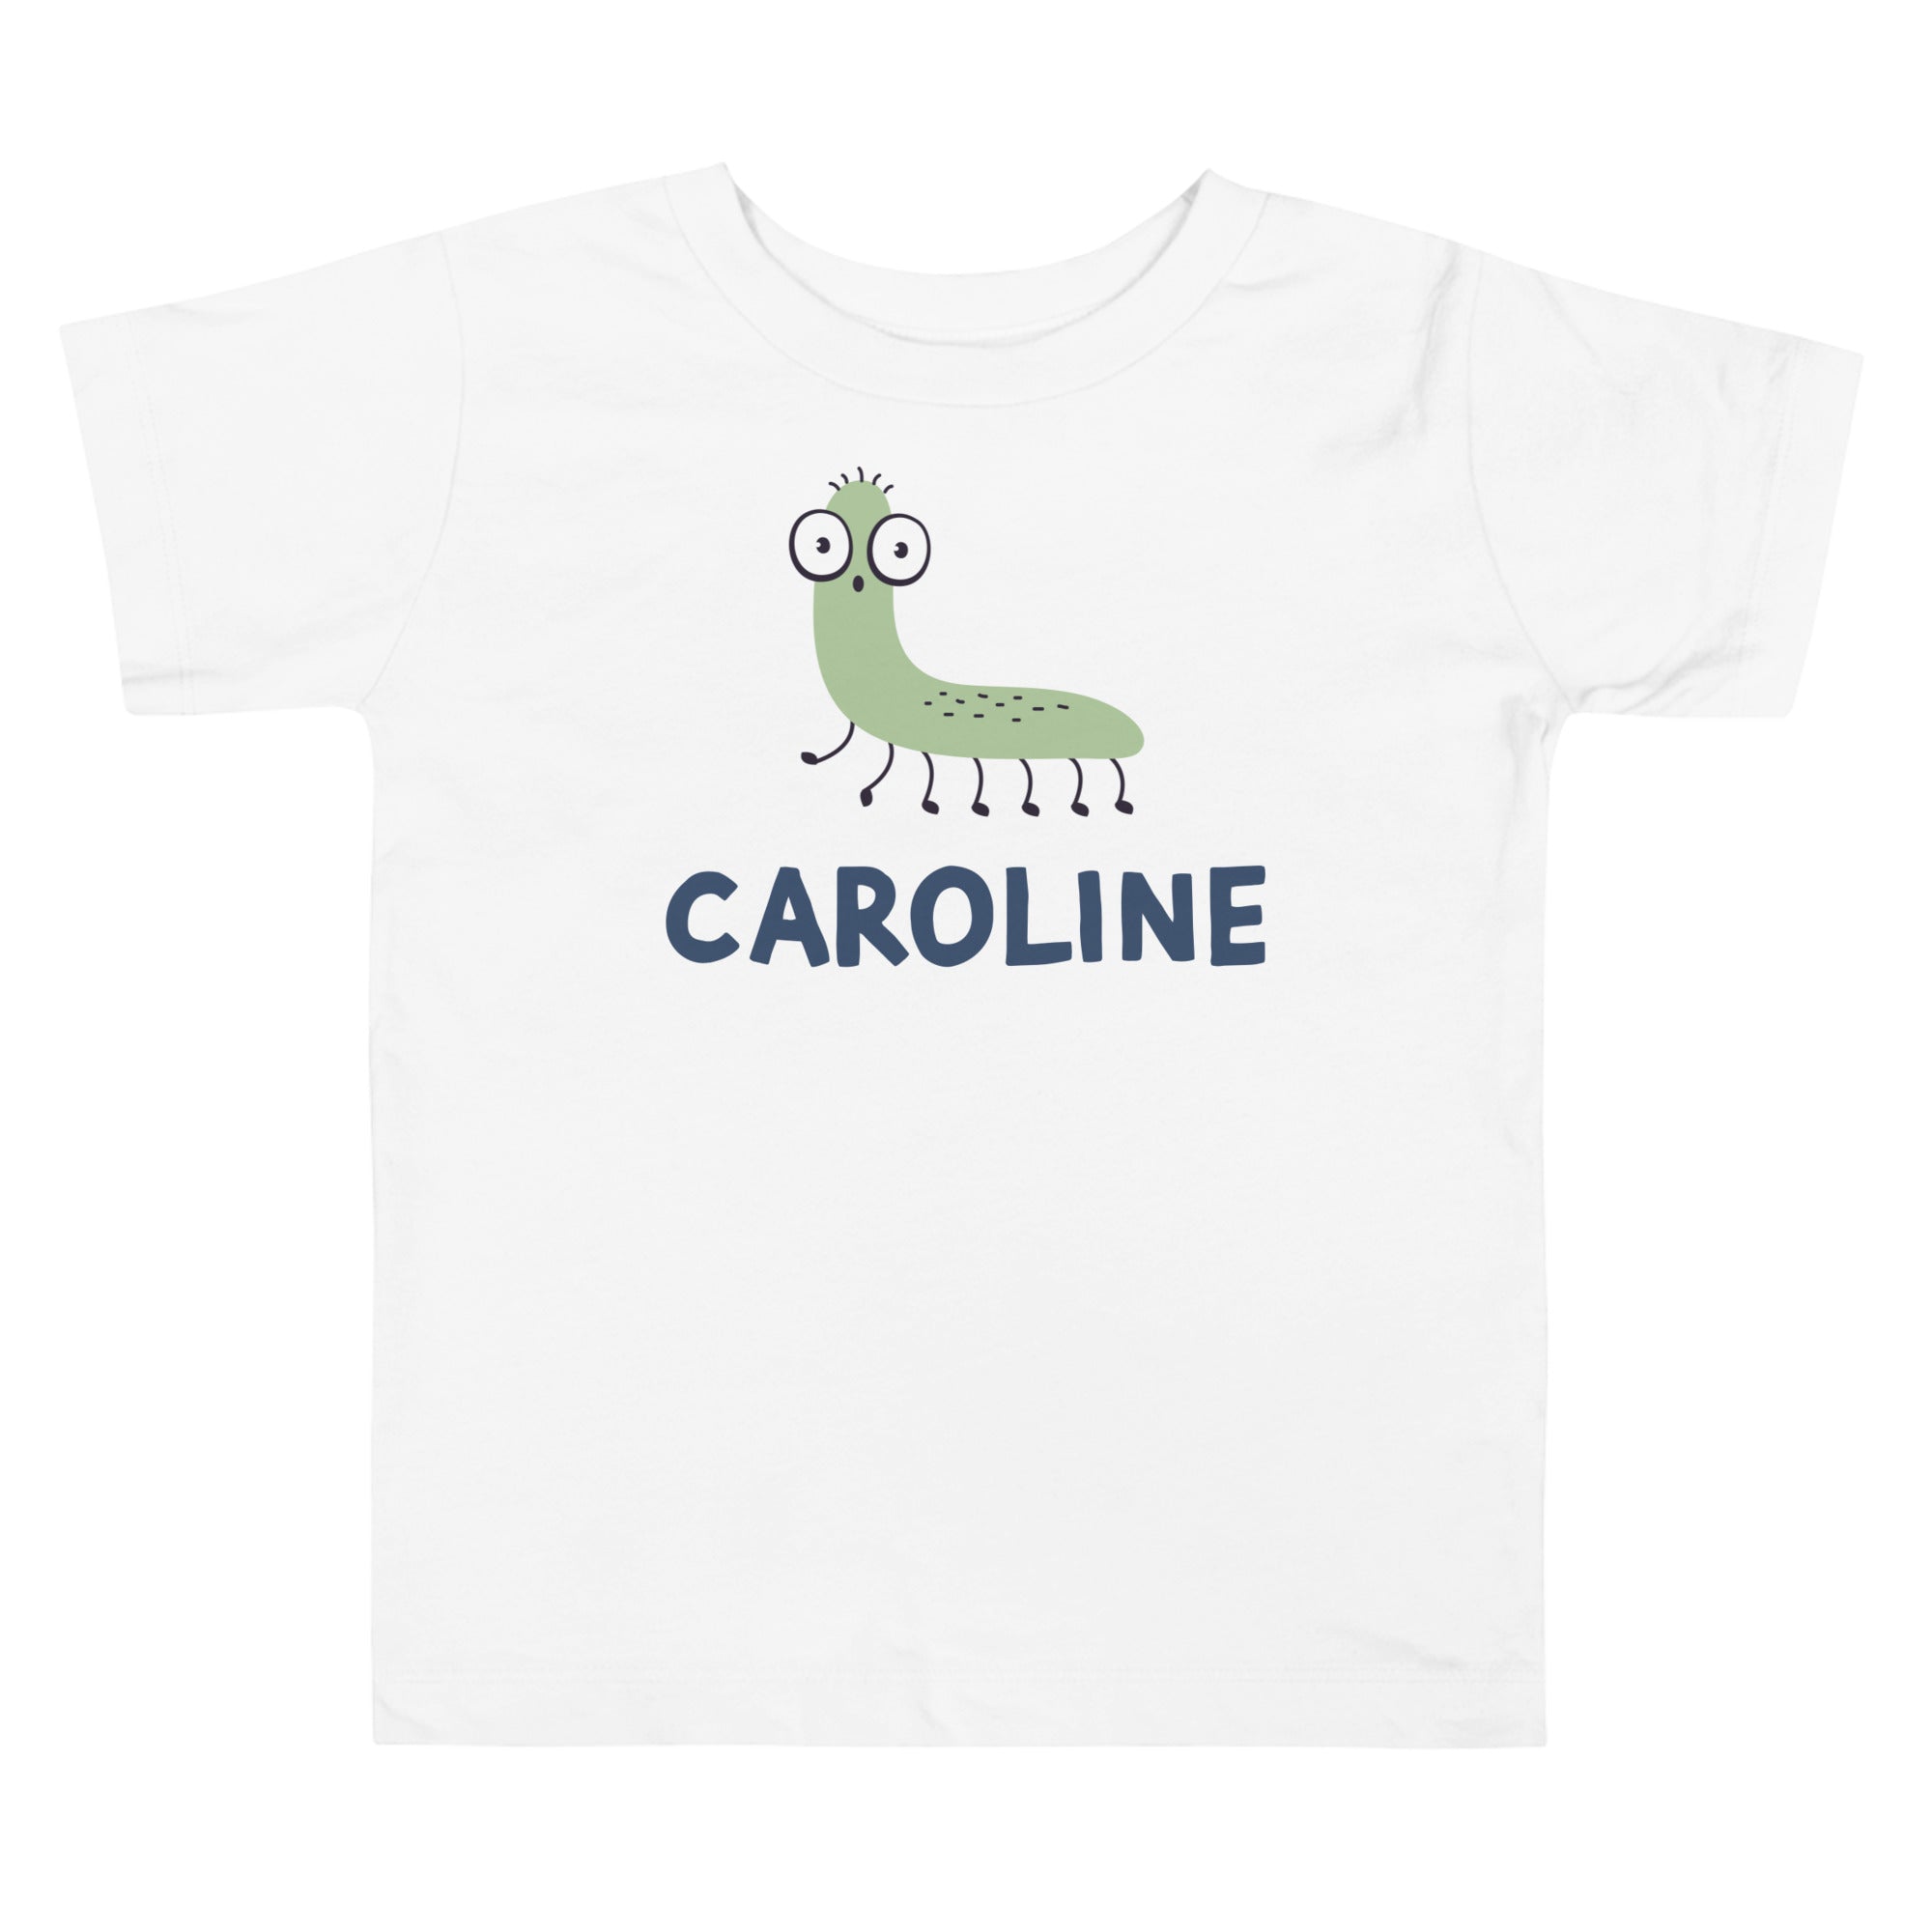 Cute personalized kids shirt with a caterpillar